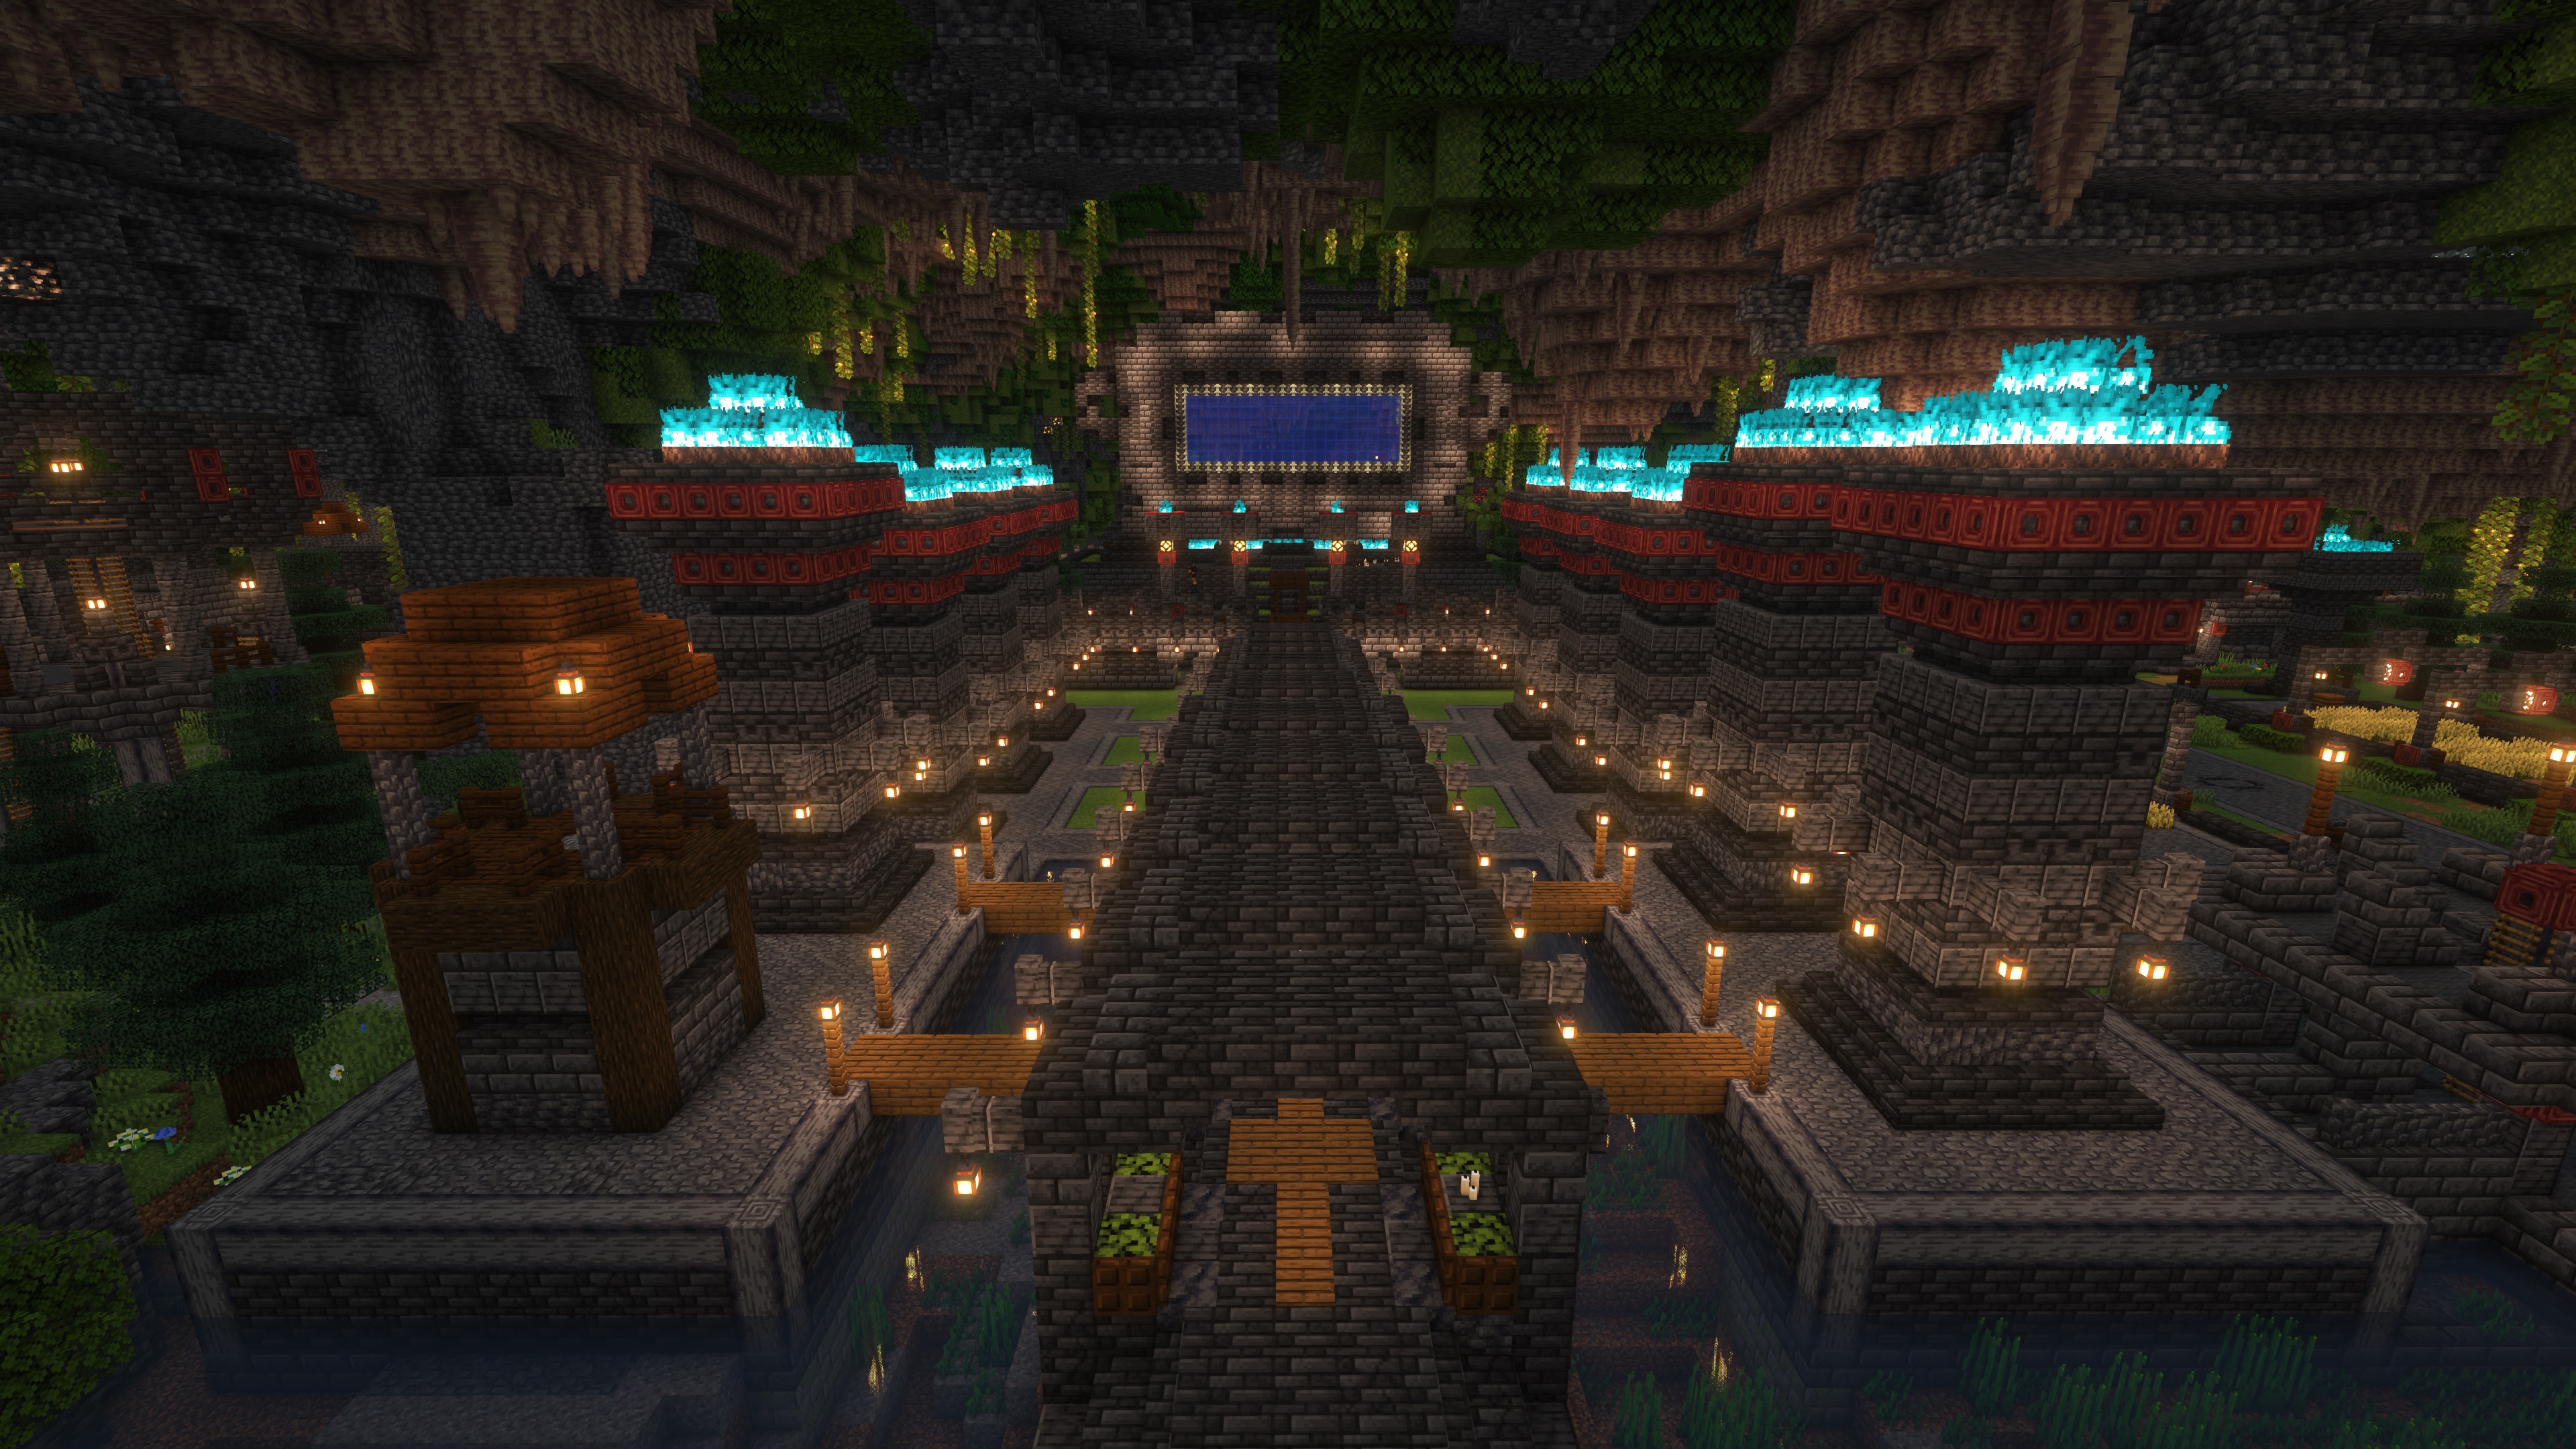 Minecraft ancient city build with a dark central portal and lit walkways leading up to it